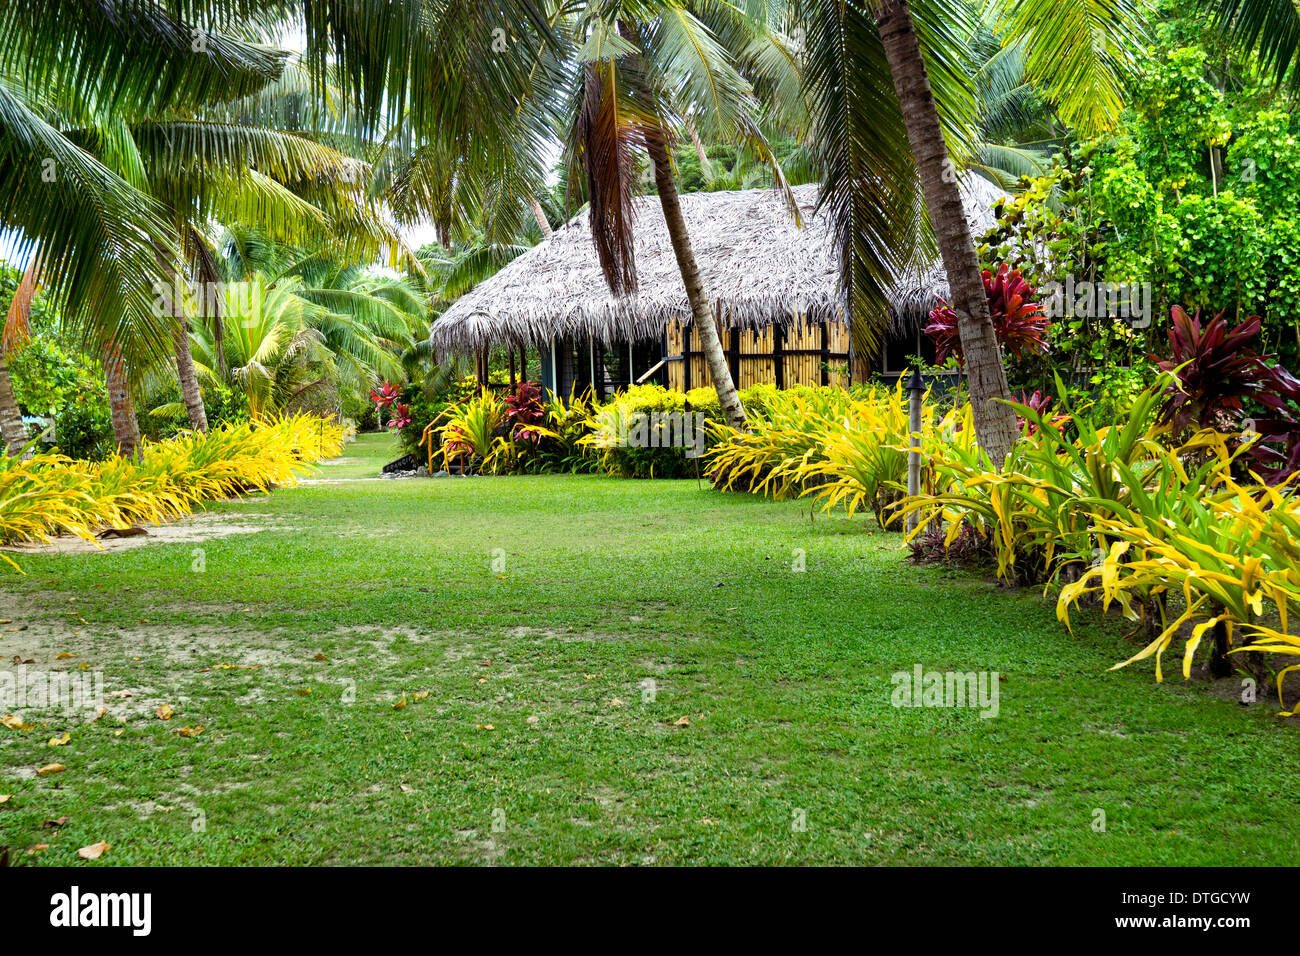 A Fijian bure along a lush, tropical beach surrounded by palm trees, green grass and many plants. Stock Photo